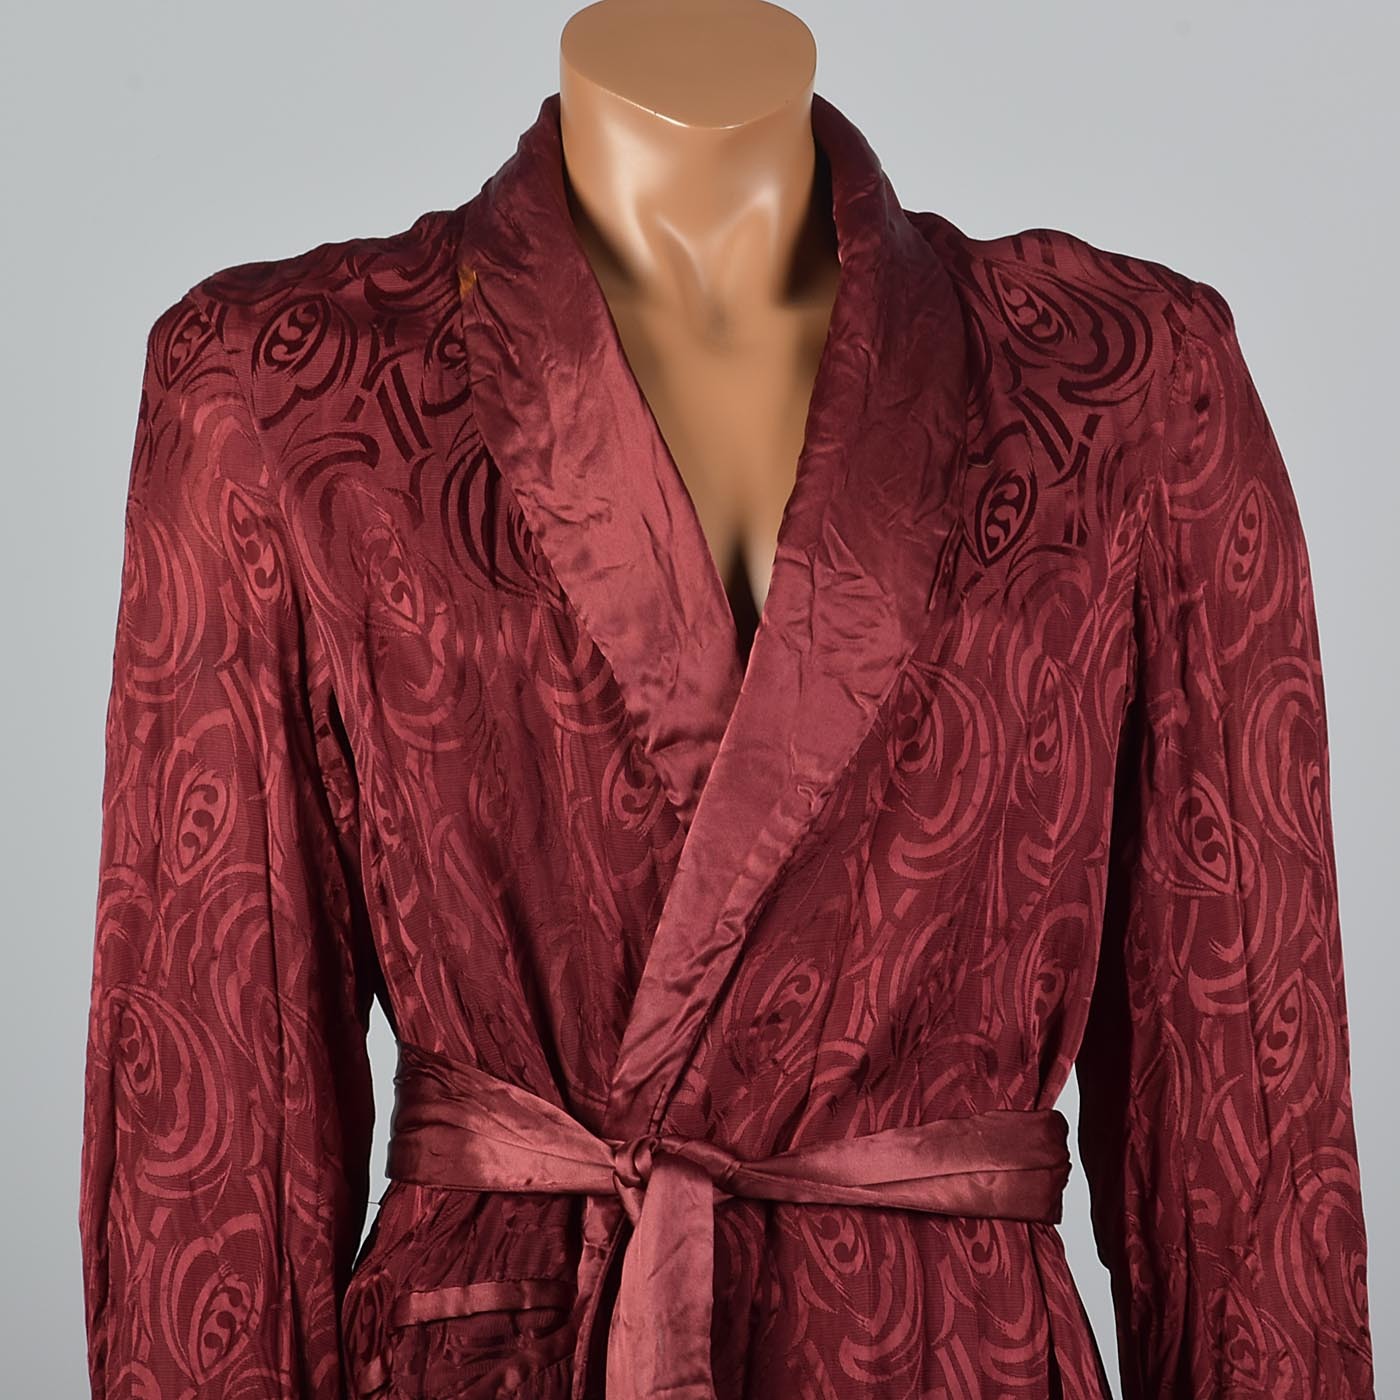 1950s Men's Rayon Red Swirl Brocade Robe with Fringe